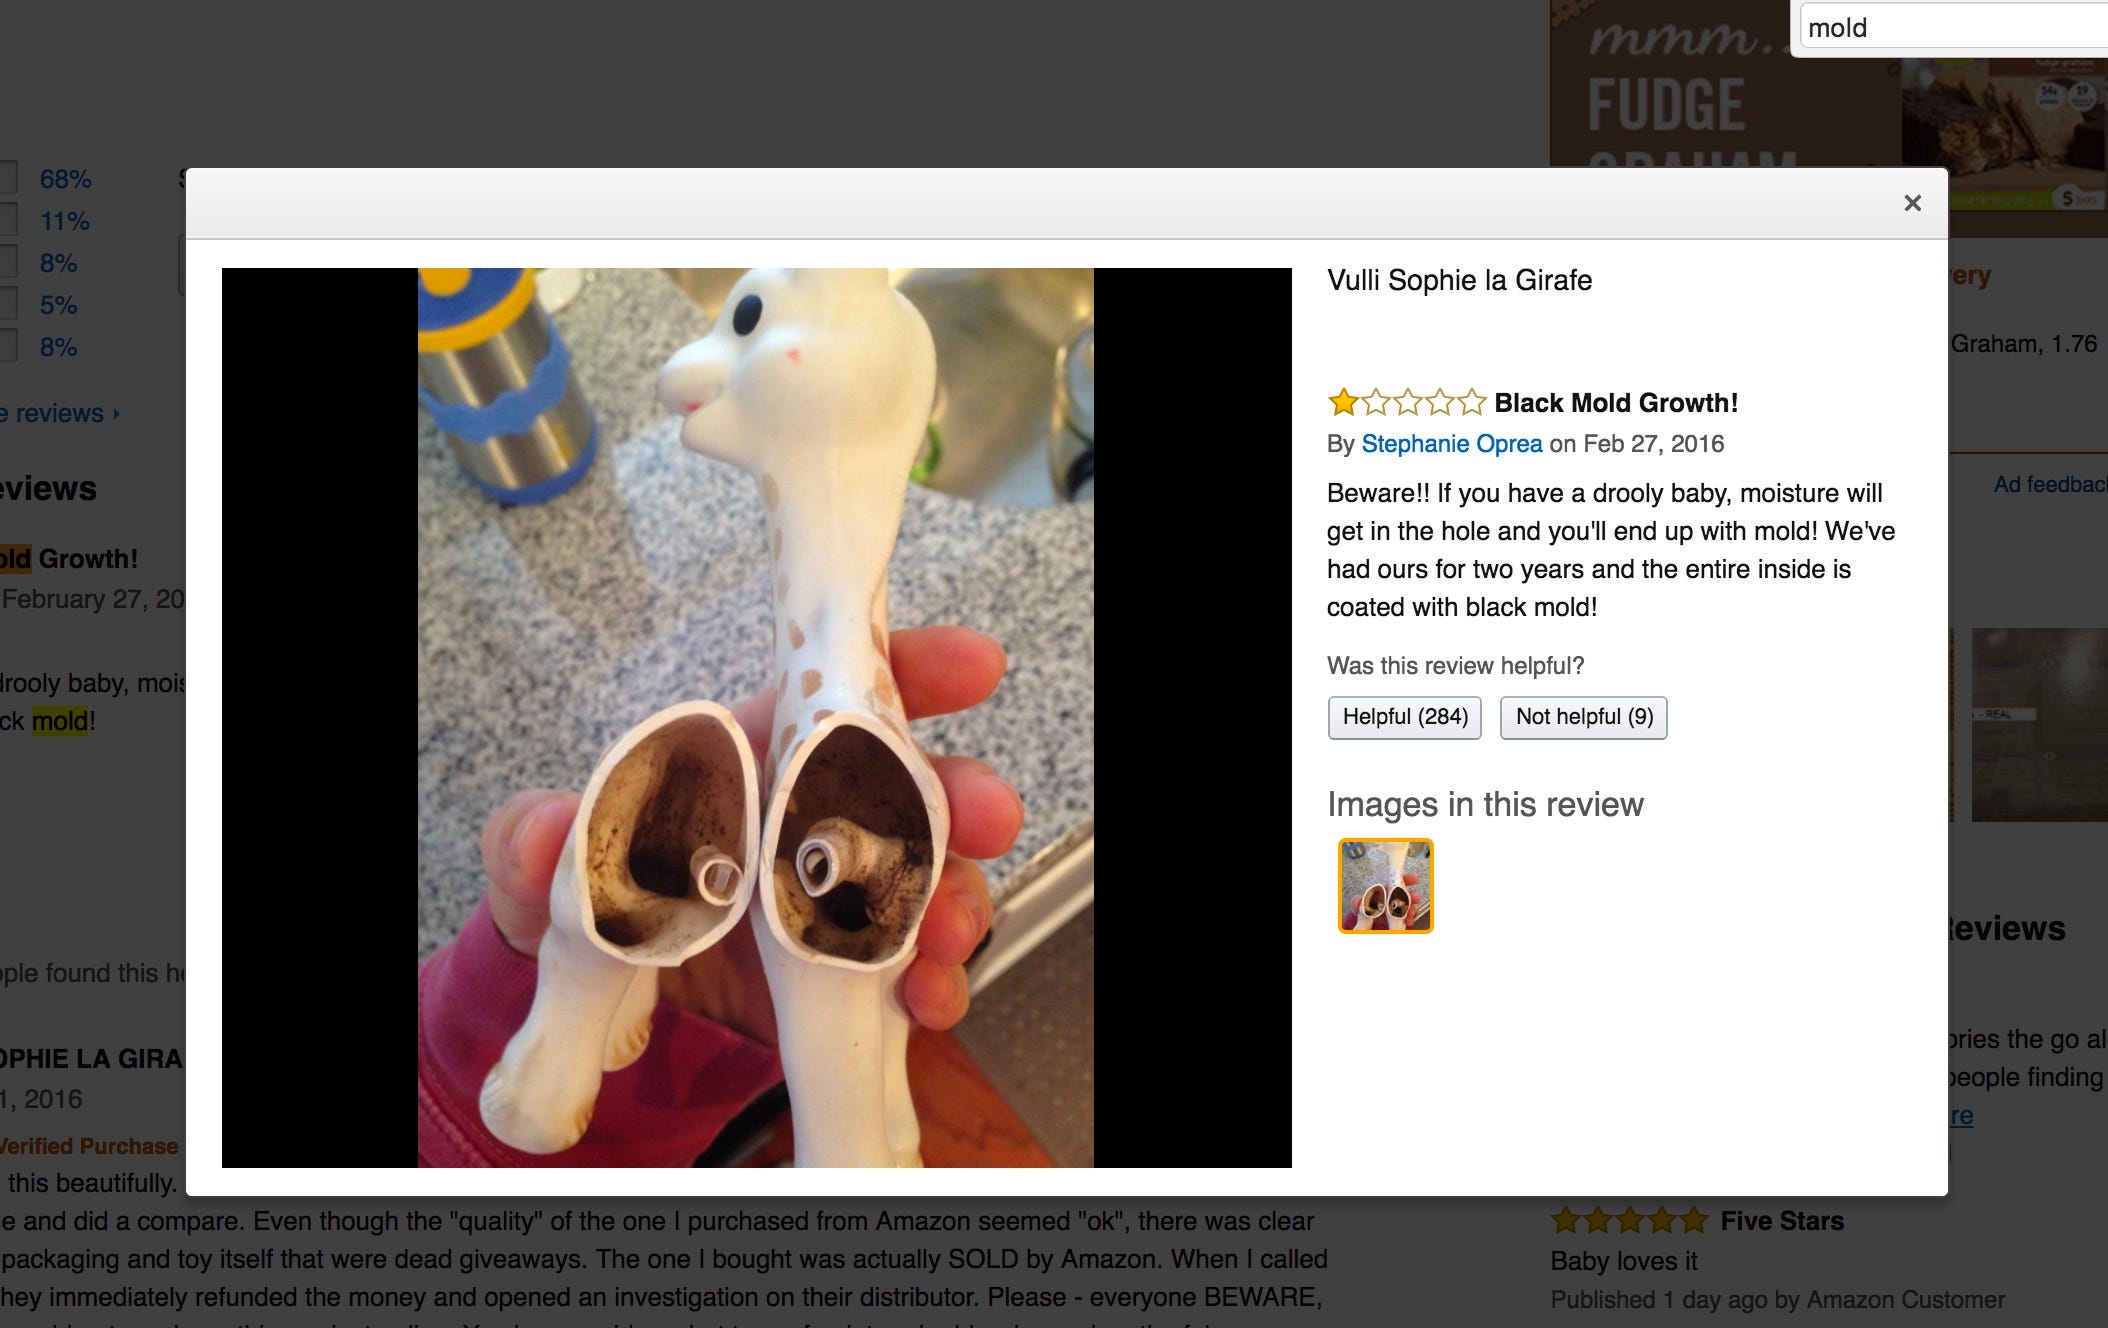 Sophie the Giraffe: Should you be worried about mold in your child's teething toy?